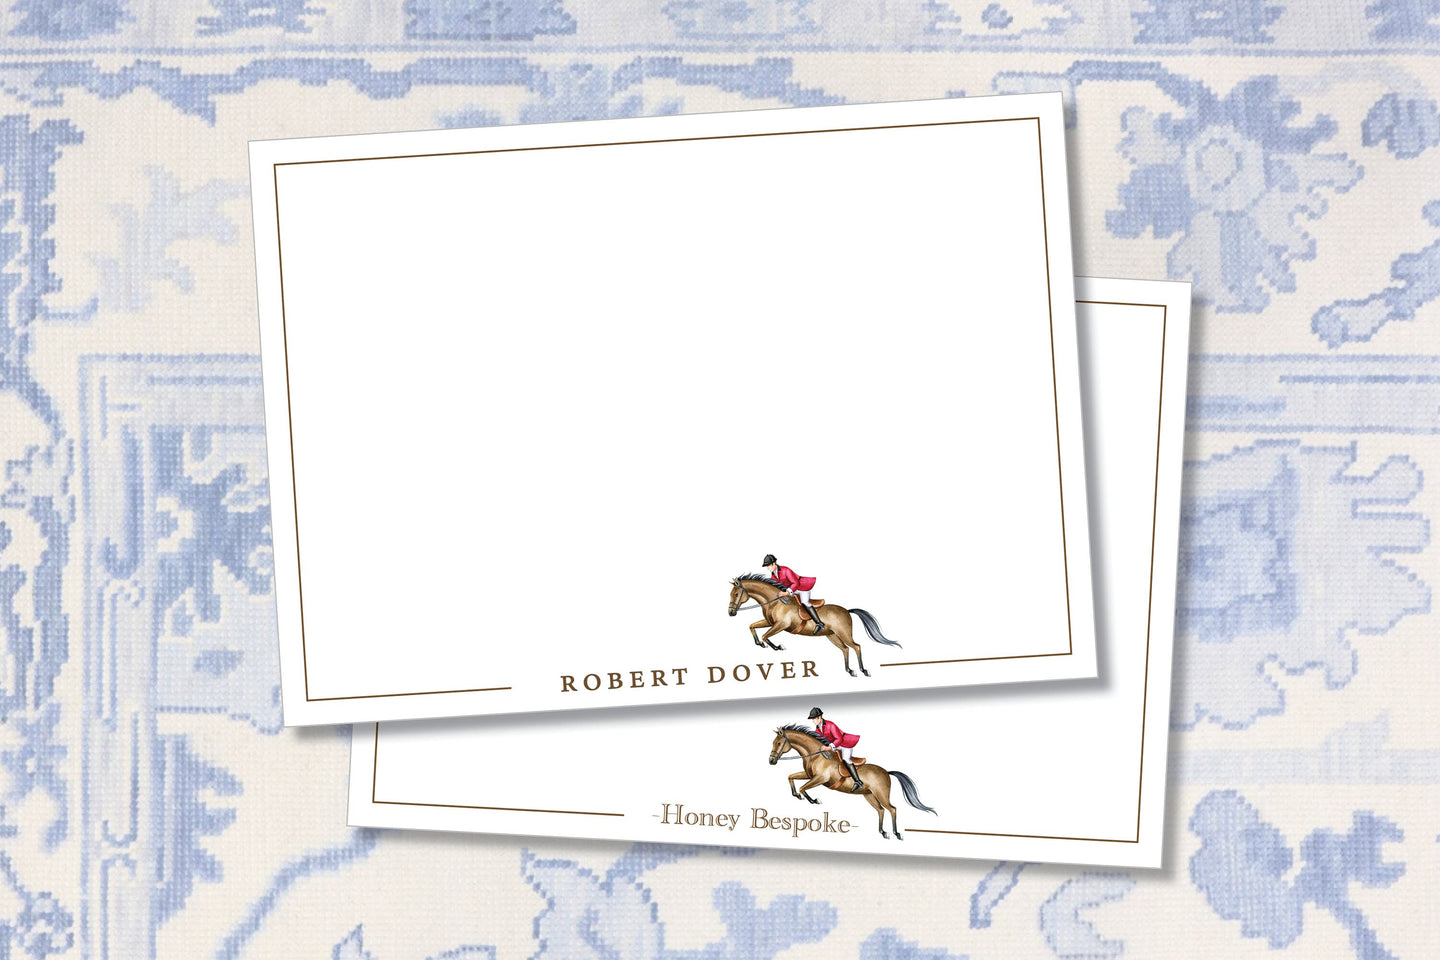 Personalized Equestrian Stationery / Equestrian Gifts / Horse Back Riding / Thank You Cards / Preppy Stationery / Thank you Notes